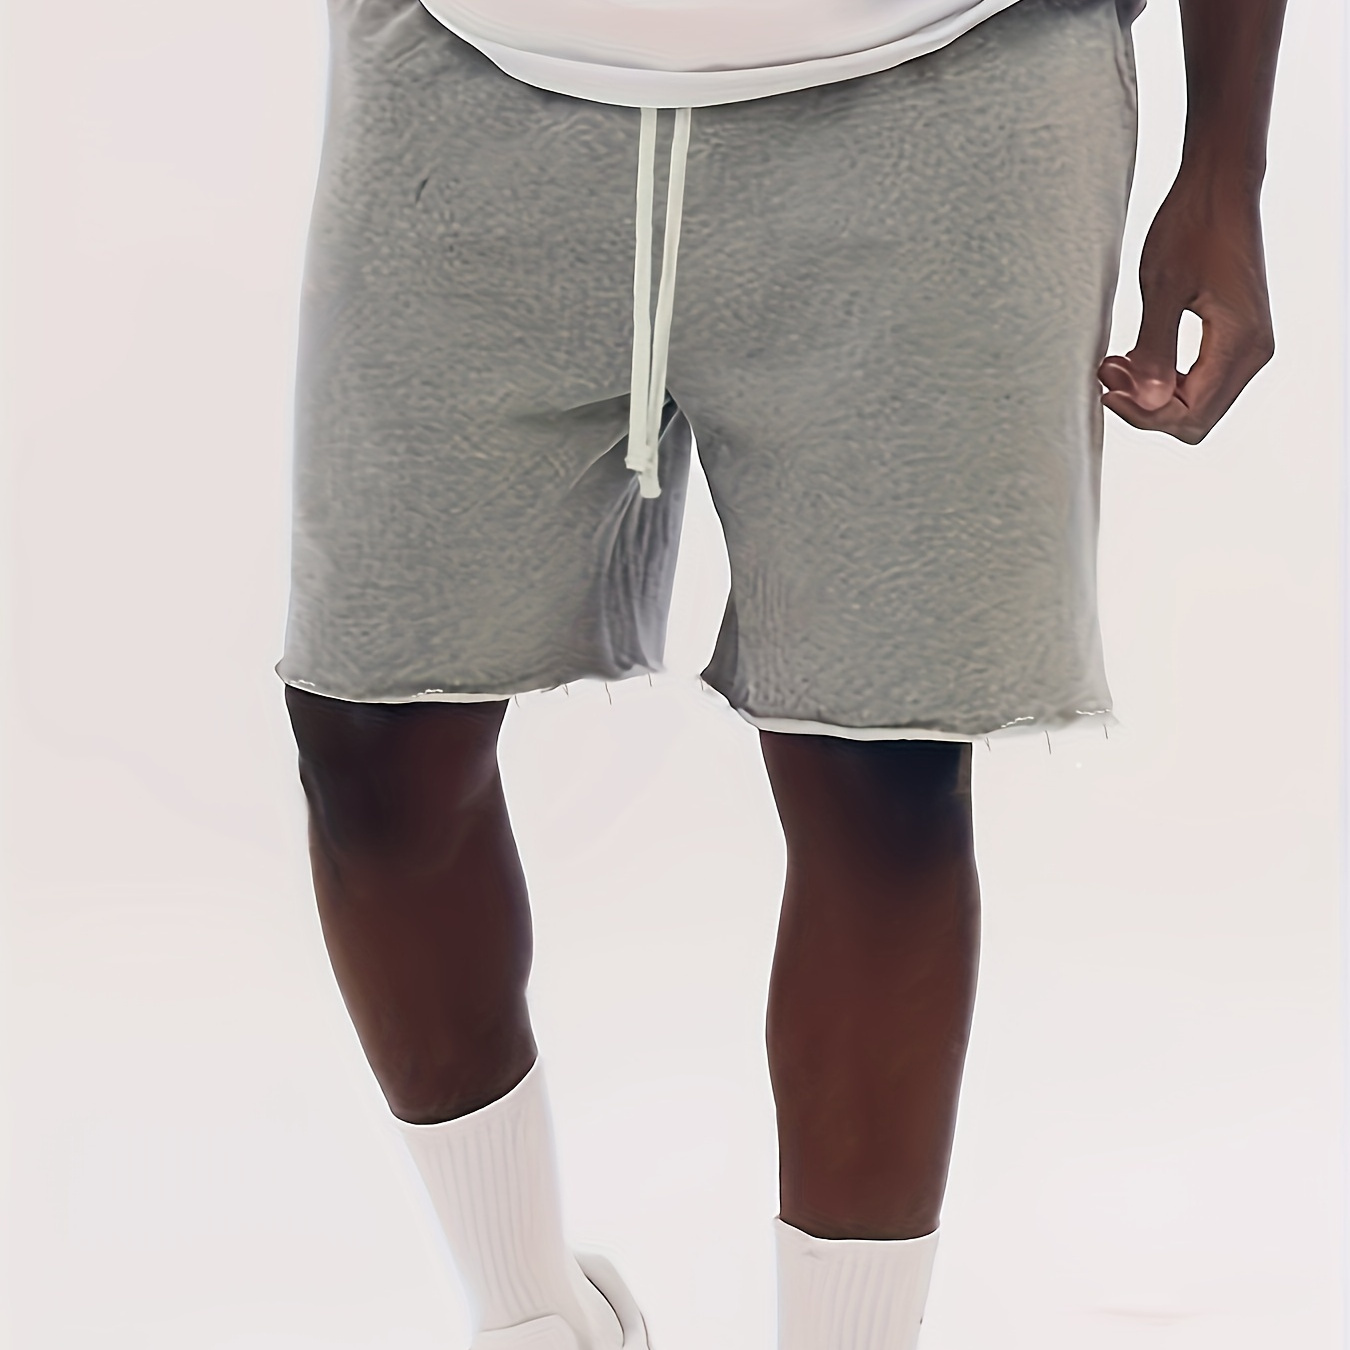 

Men's Solid Shorts With Drawstring And Pockets, Casual And Chic Shorts For Summer Outdoors Wear